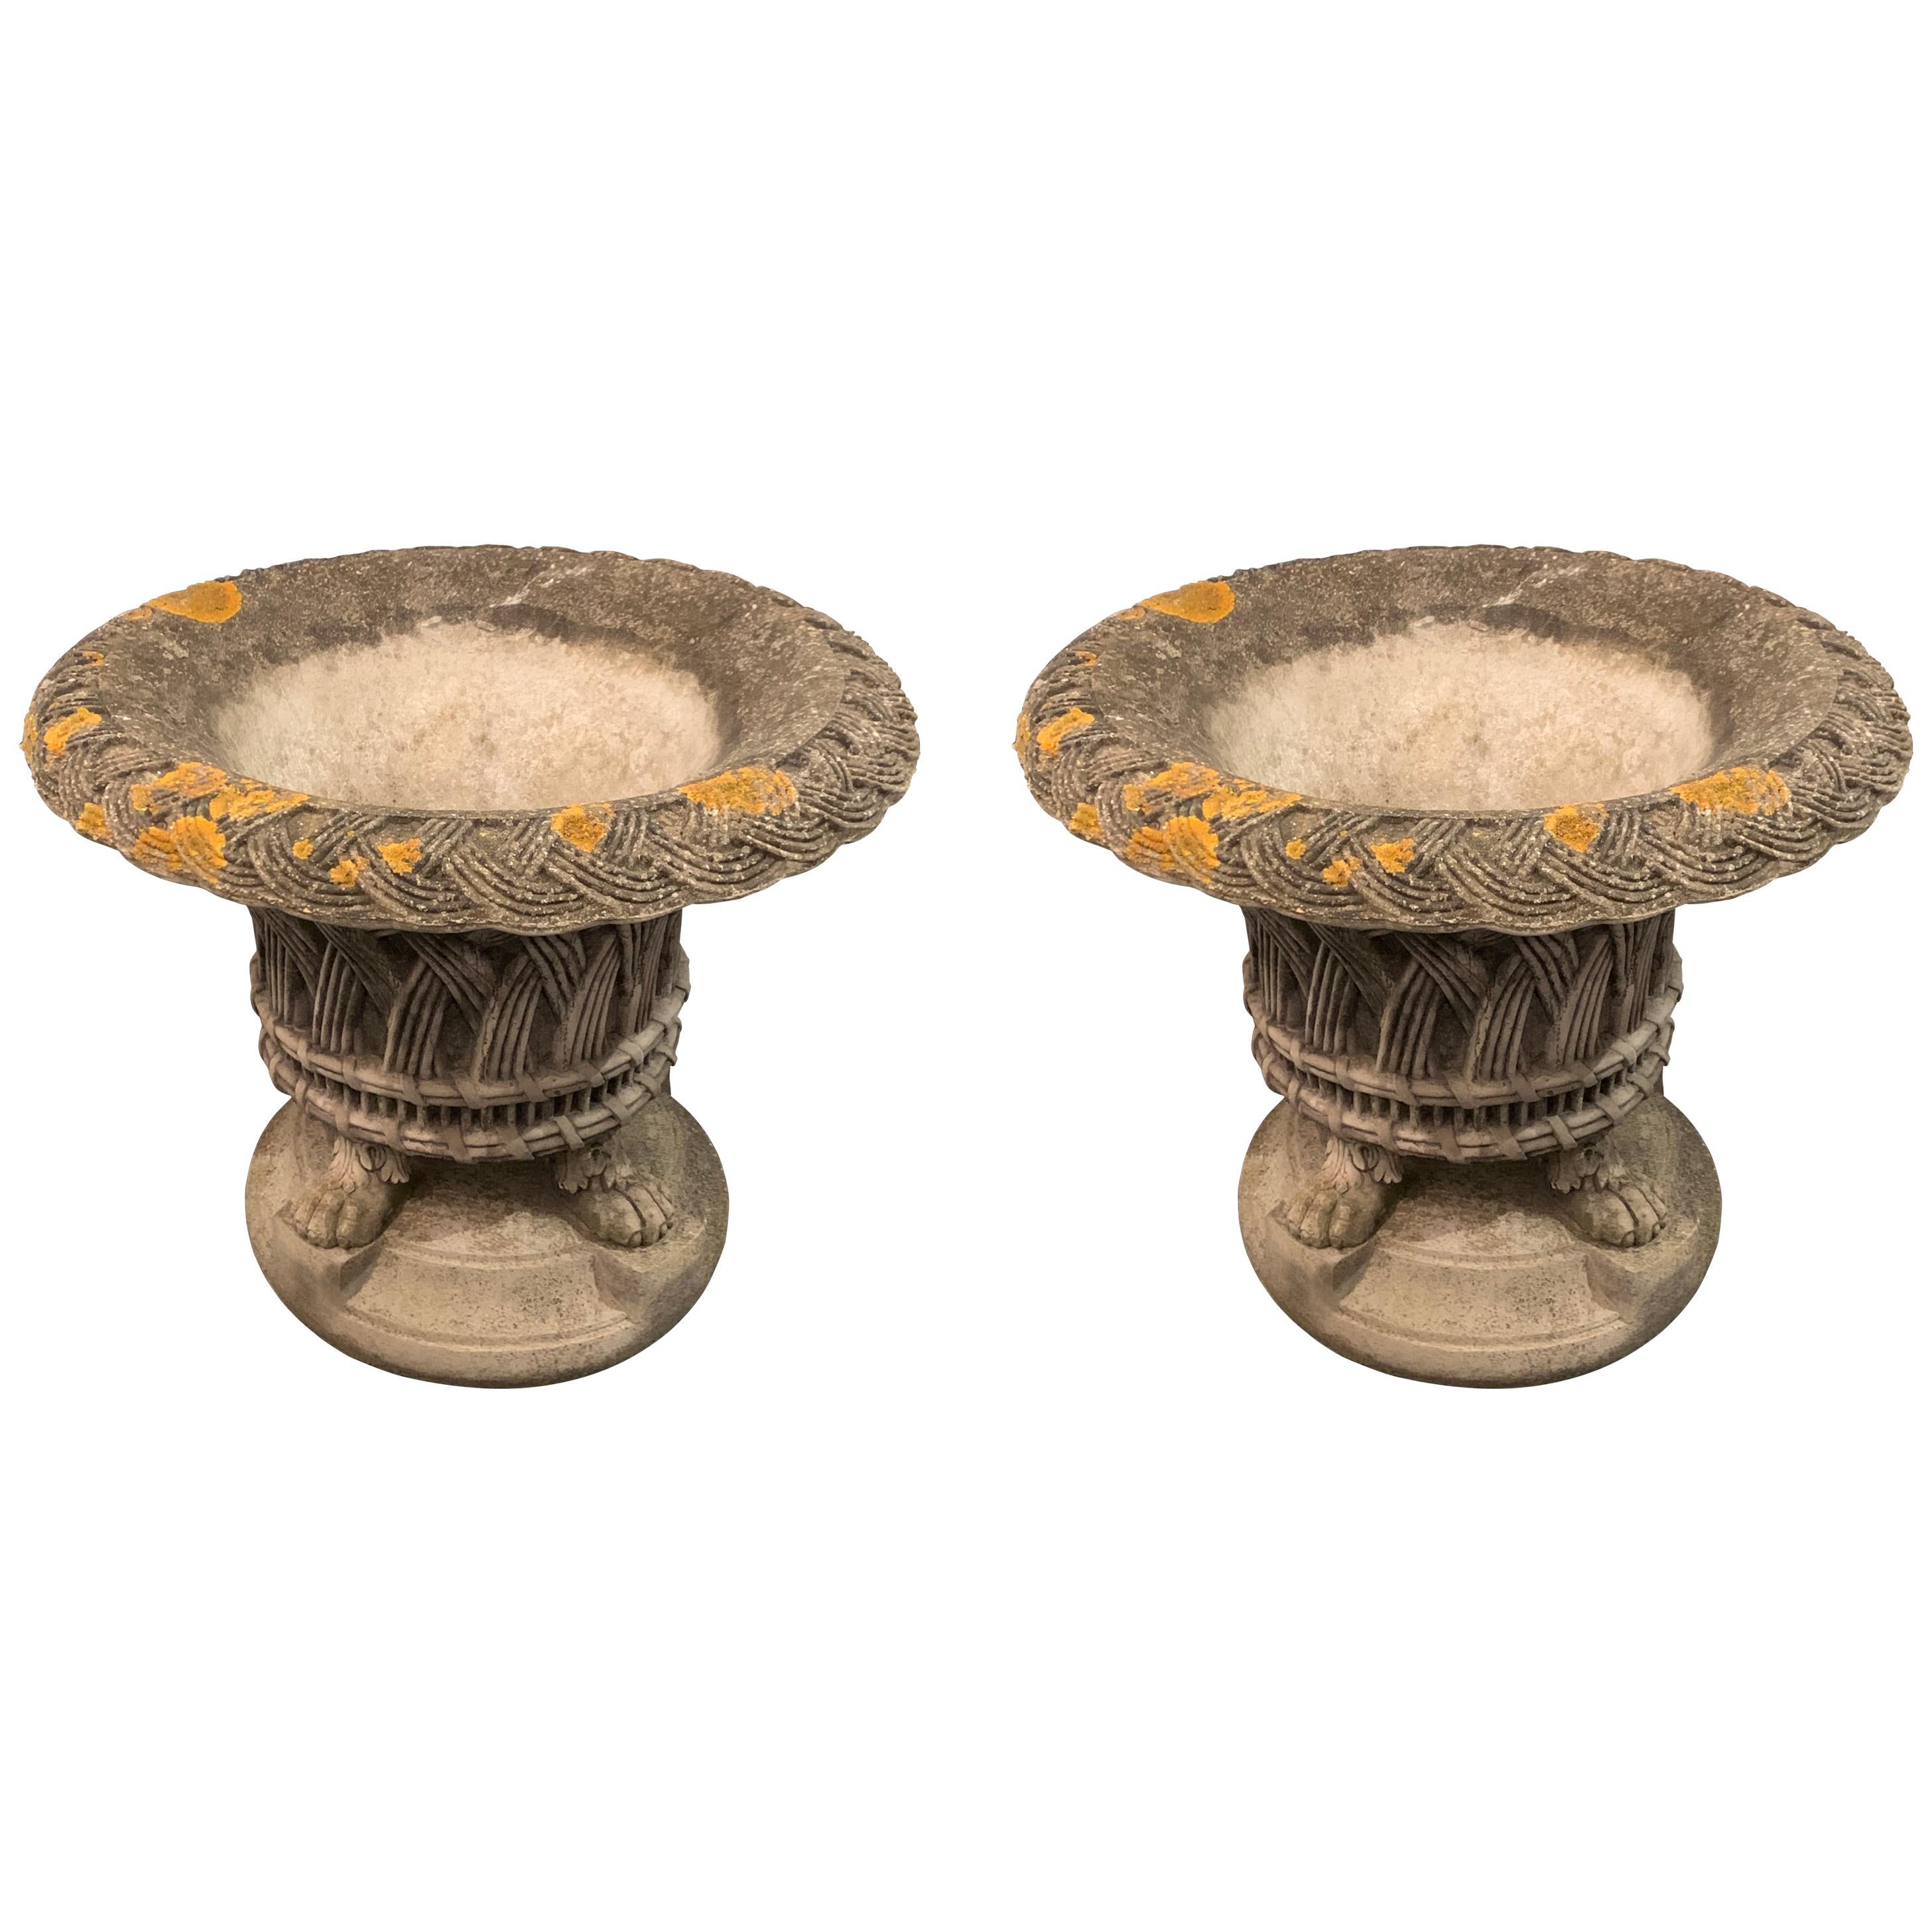 1930s English pair of basket weave patterned planters on four feet.
The Classic design planters sit on top of a round stone plinth.
Original and natural patina with lichen and spores embedded in stone.
Interior depth 15